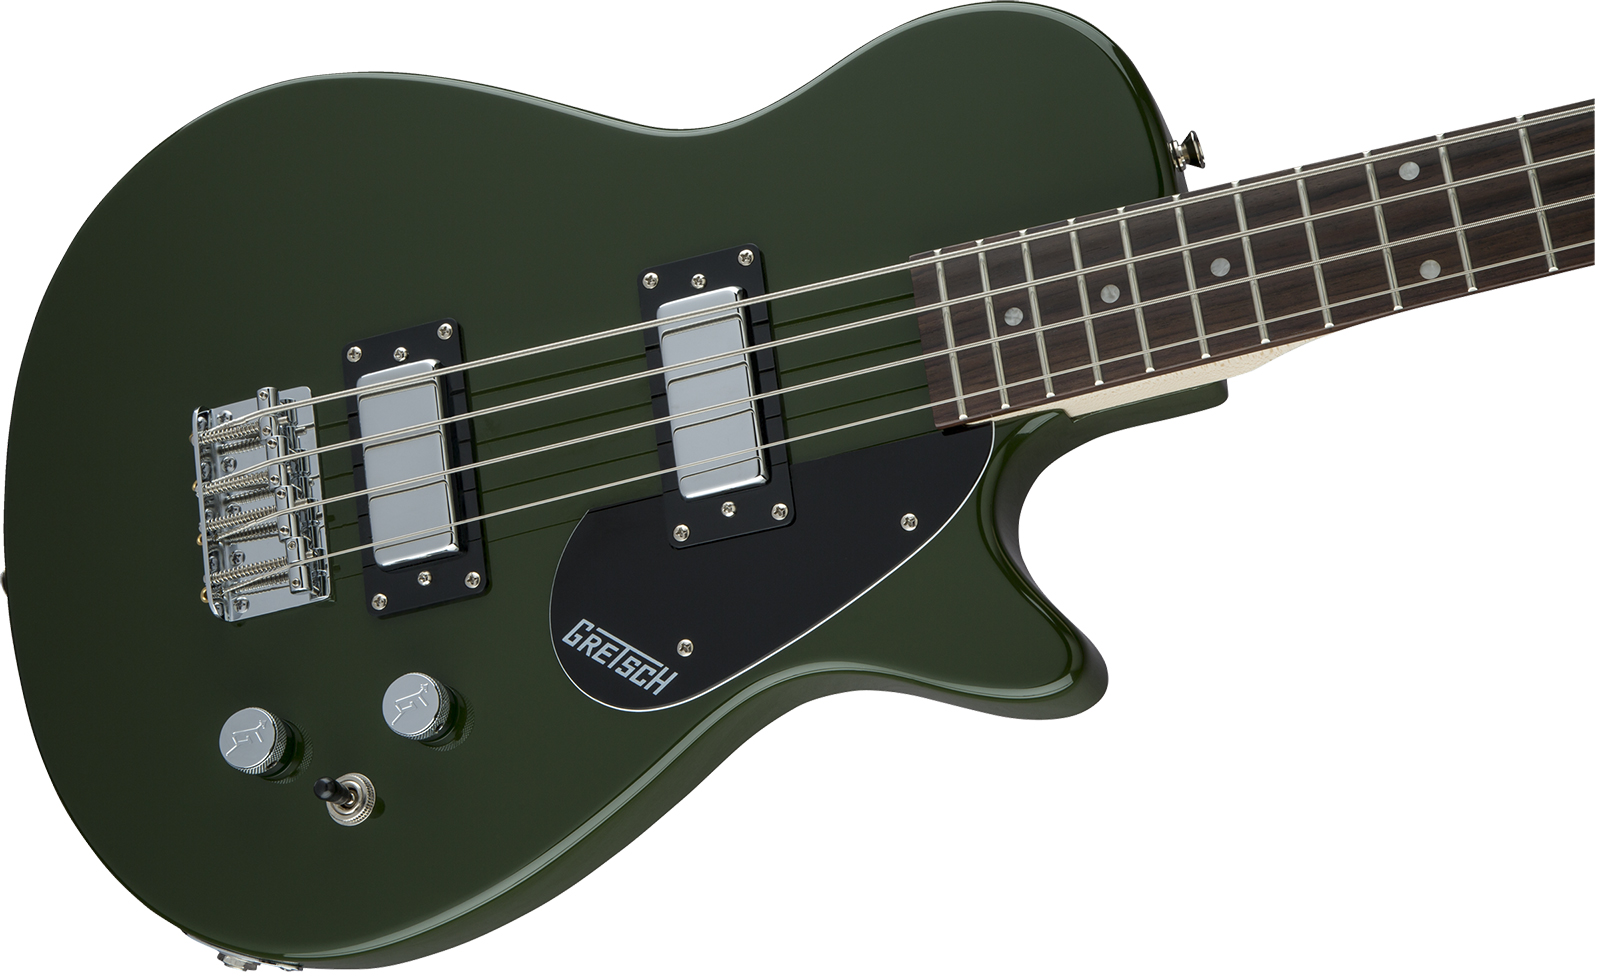 Gretsch G2220 Junior Jet Bass Ii Short Scale Electromatic Wal - Torino Green - Electric bass for kids - Variation 2